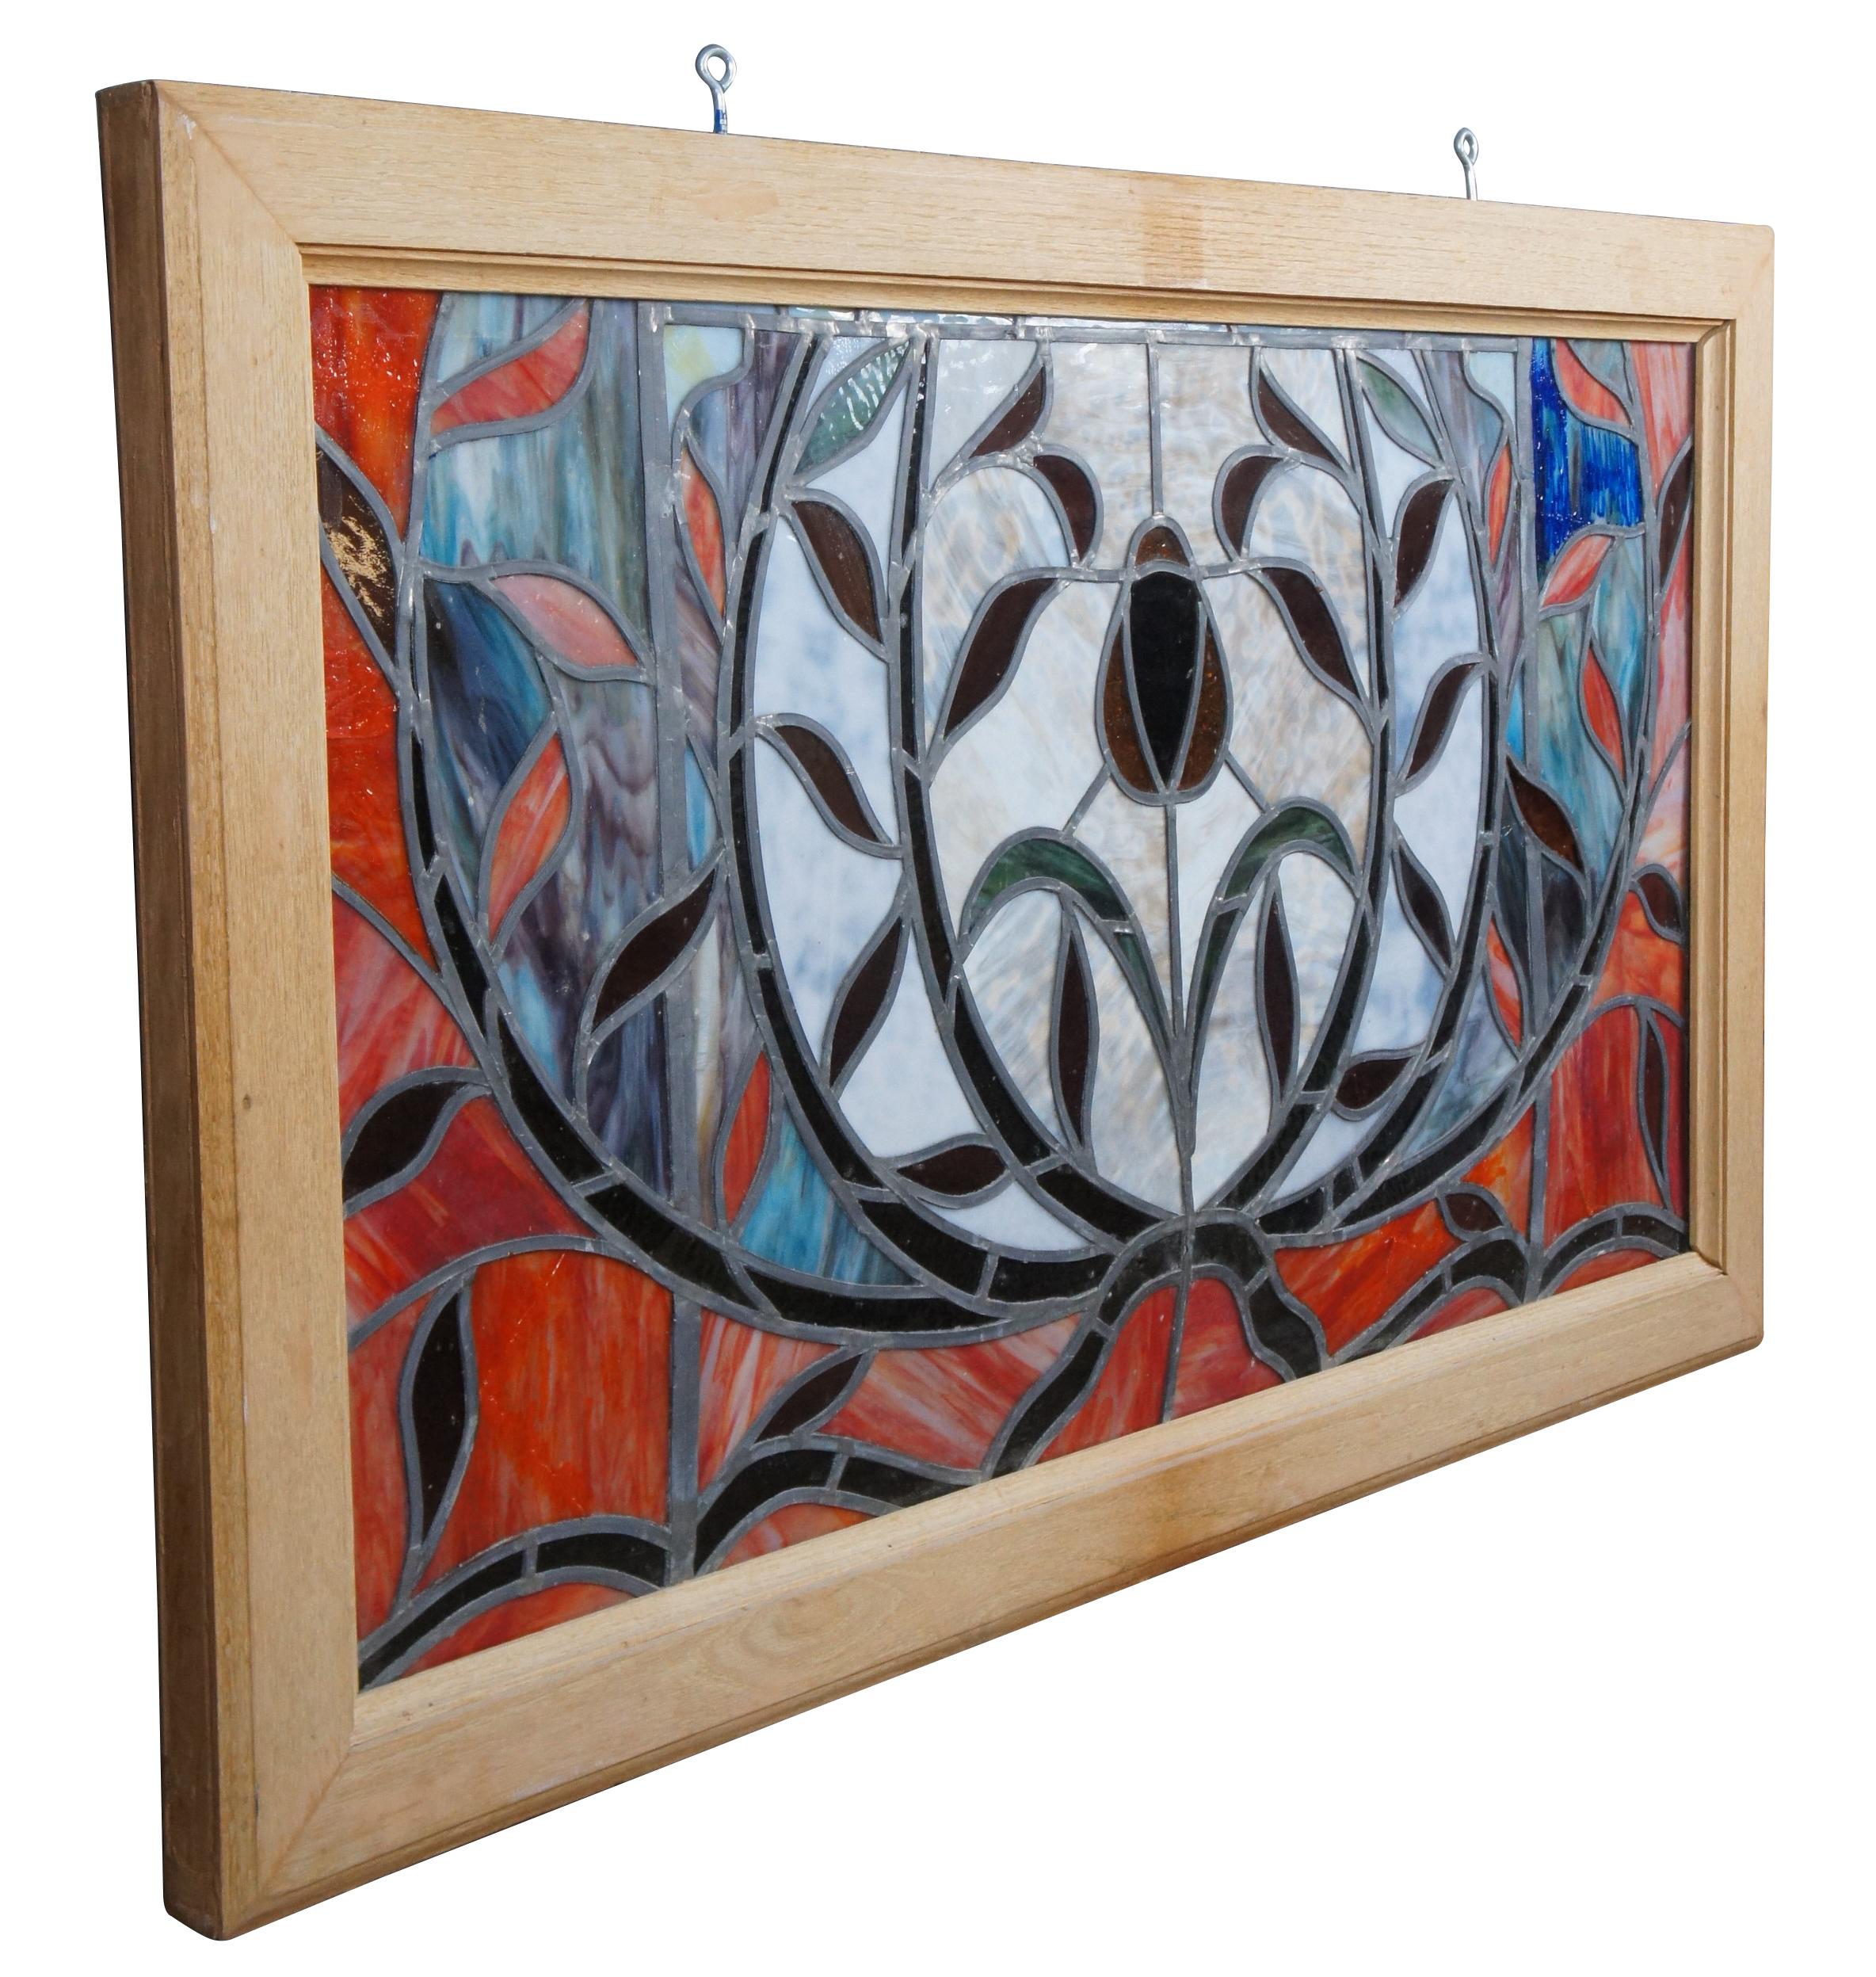 Late 20th century leaded stained glass window hanging panel. Features a field of red with accents of amber, blue and purple. At the center is a rose with foliate surrounds. Framed in a heavy oak with two eye hooks along the top for hanging